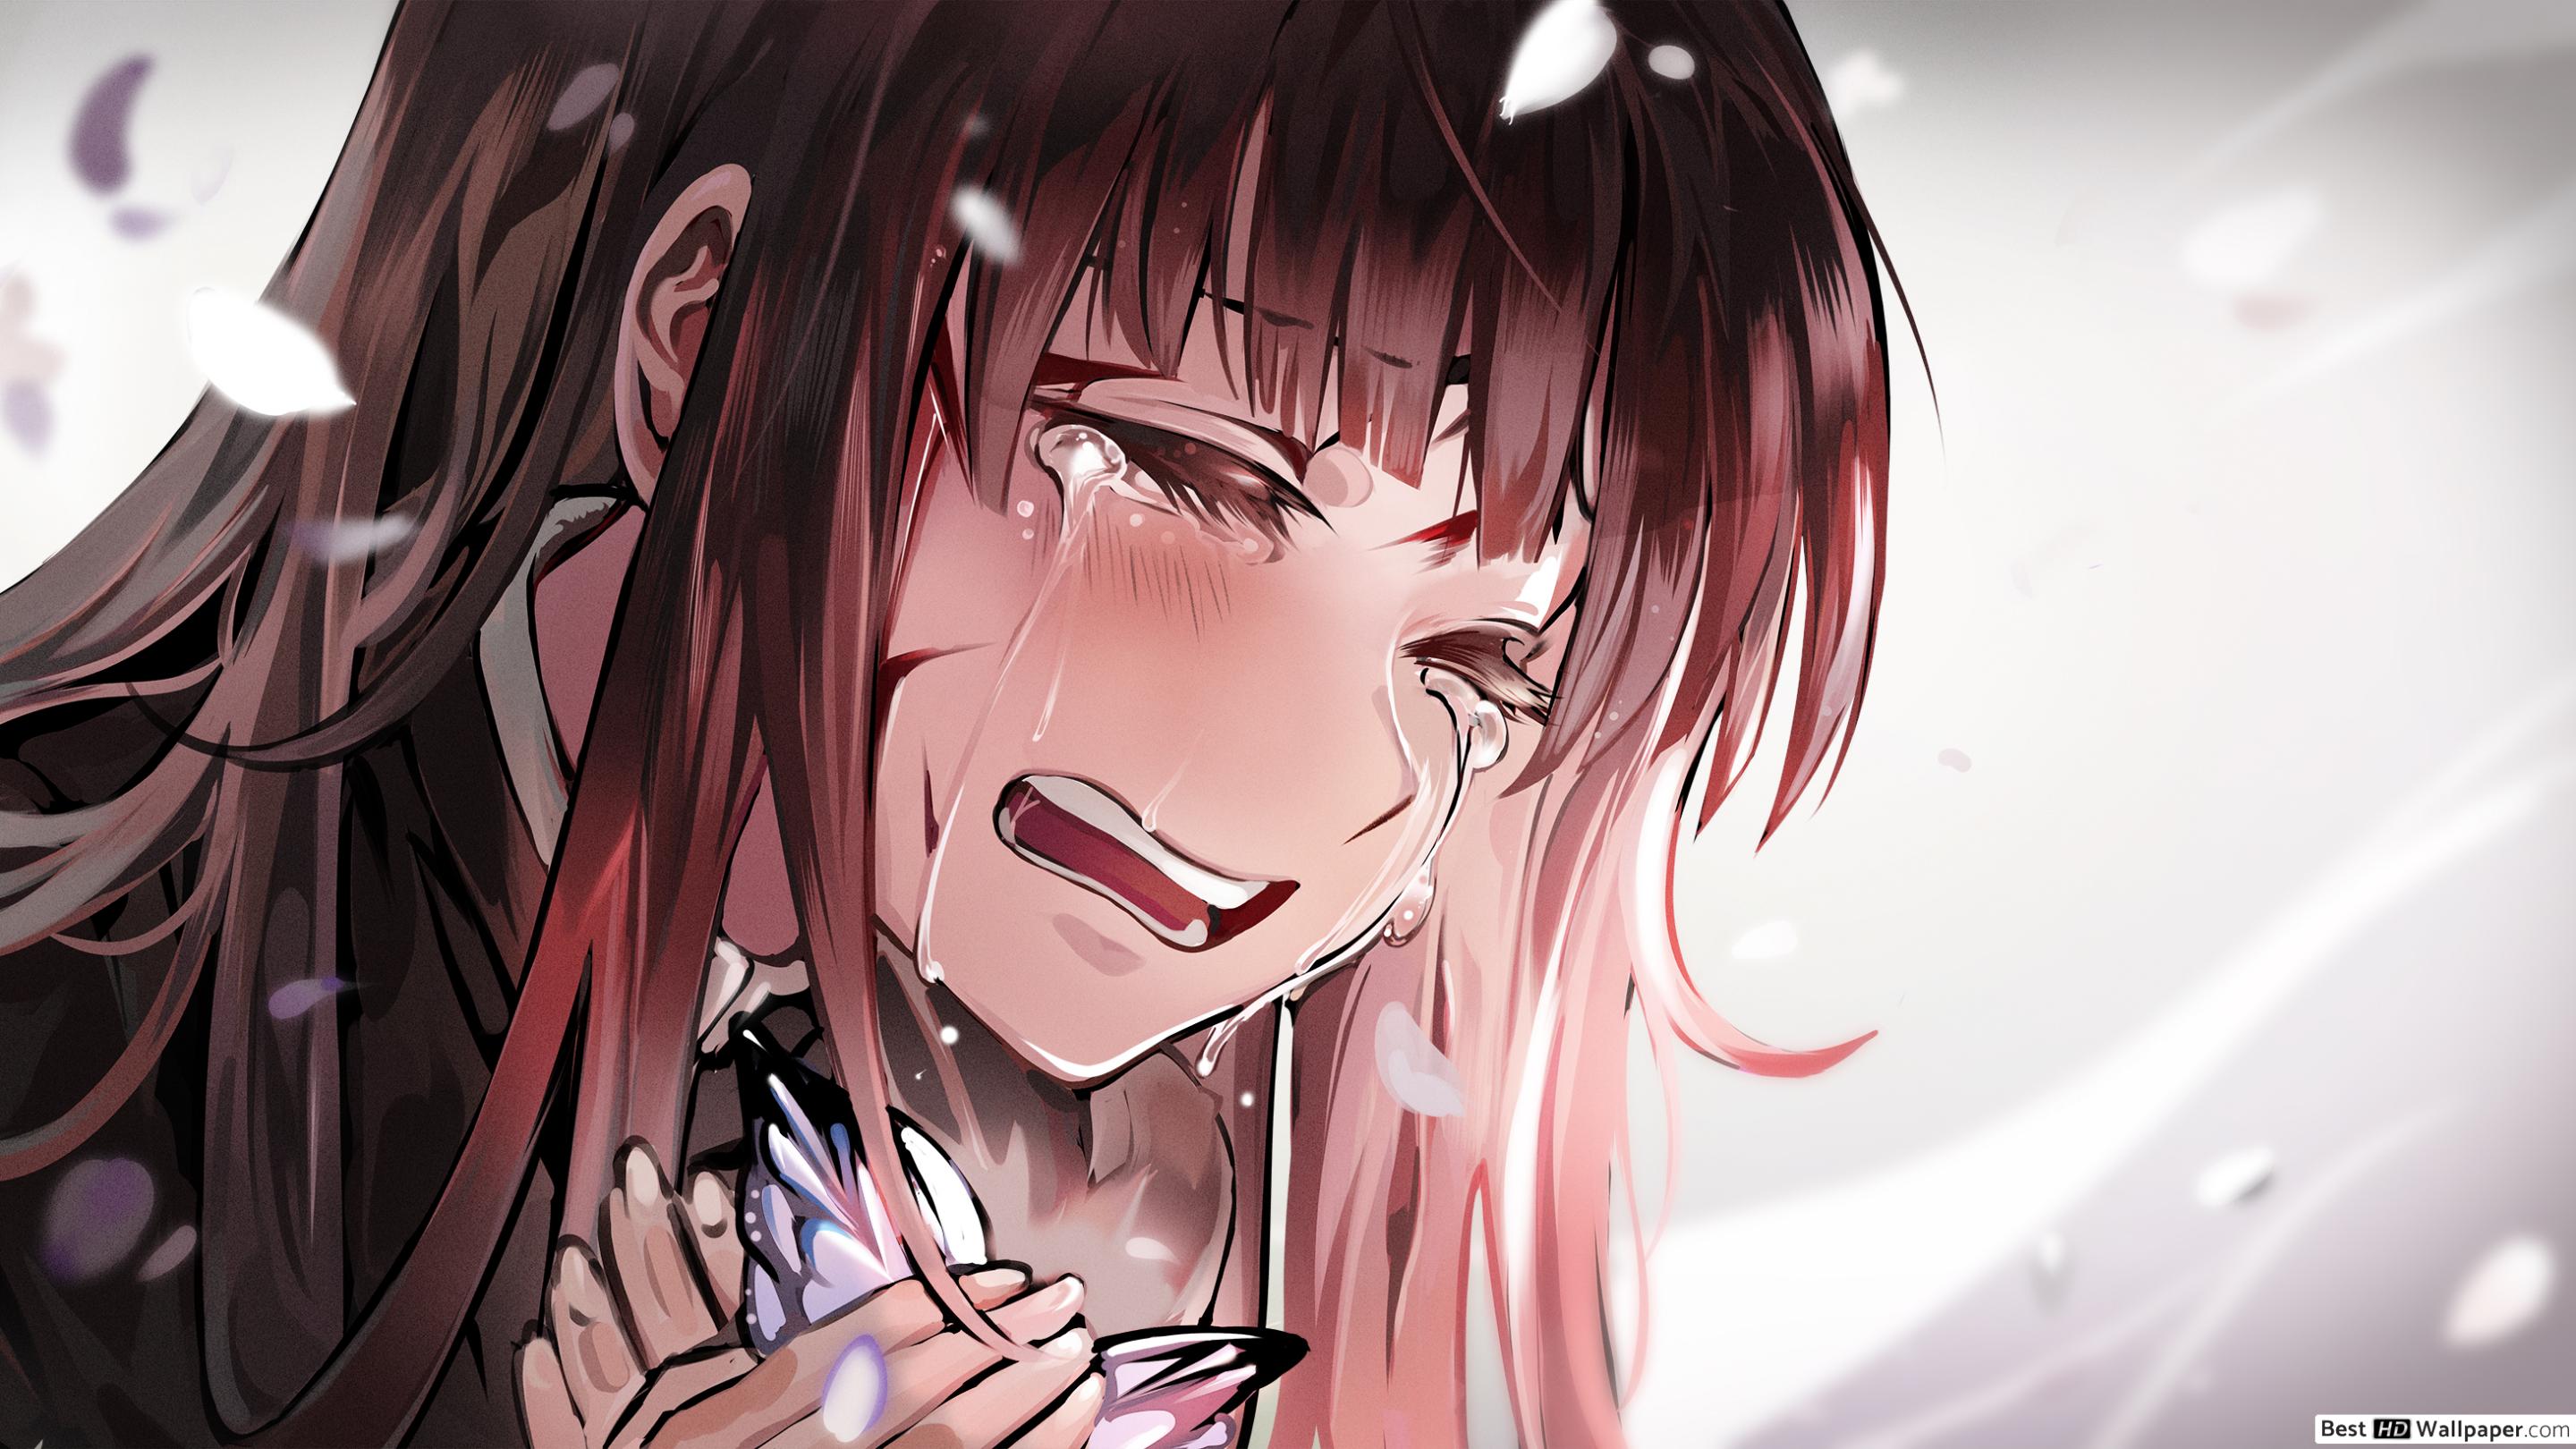 Kanao cries and grieves for Shinobu HD wallpaper download